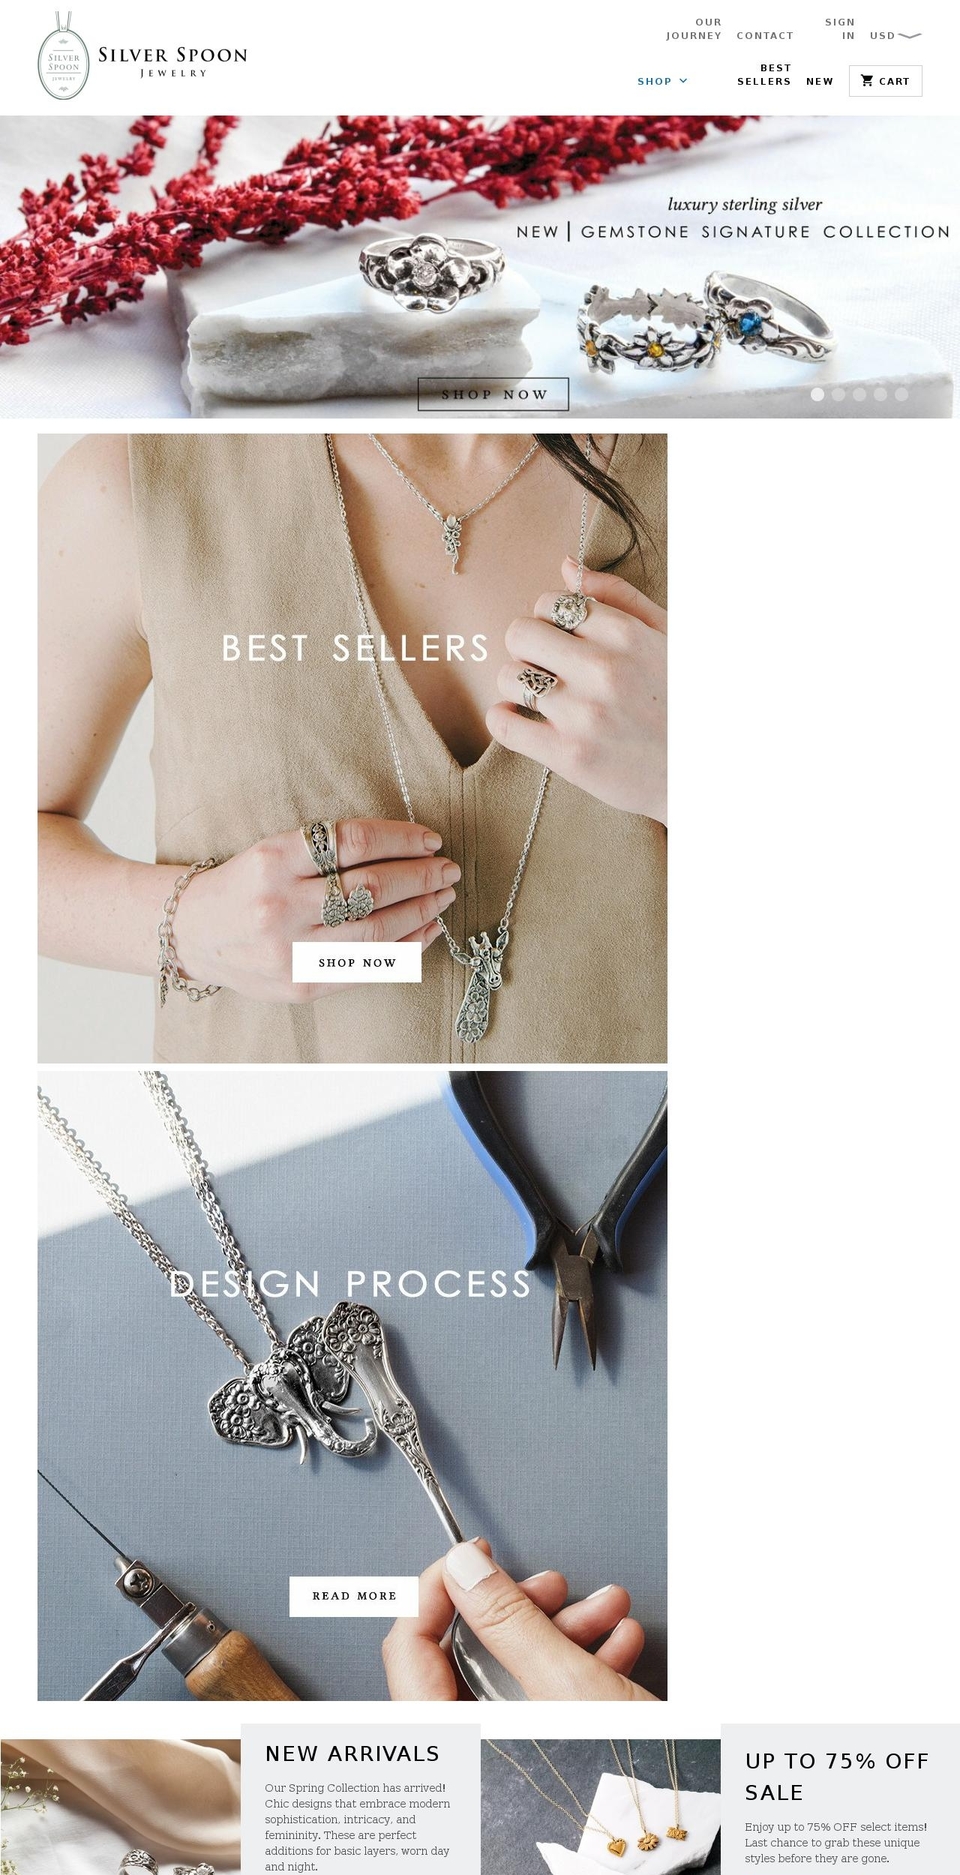 Mobilia Shopify theme site example silverspoonjewelry.com